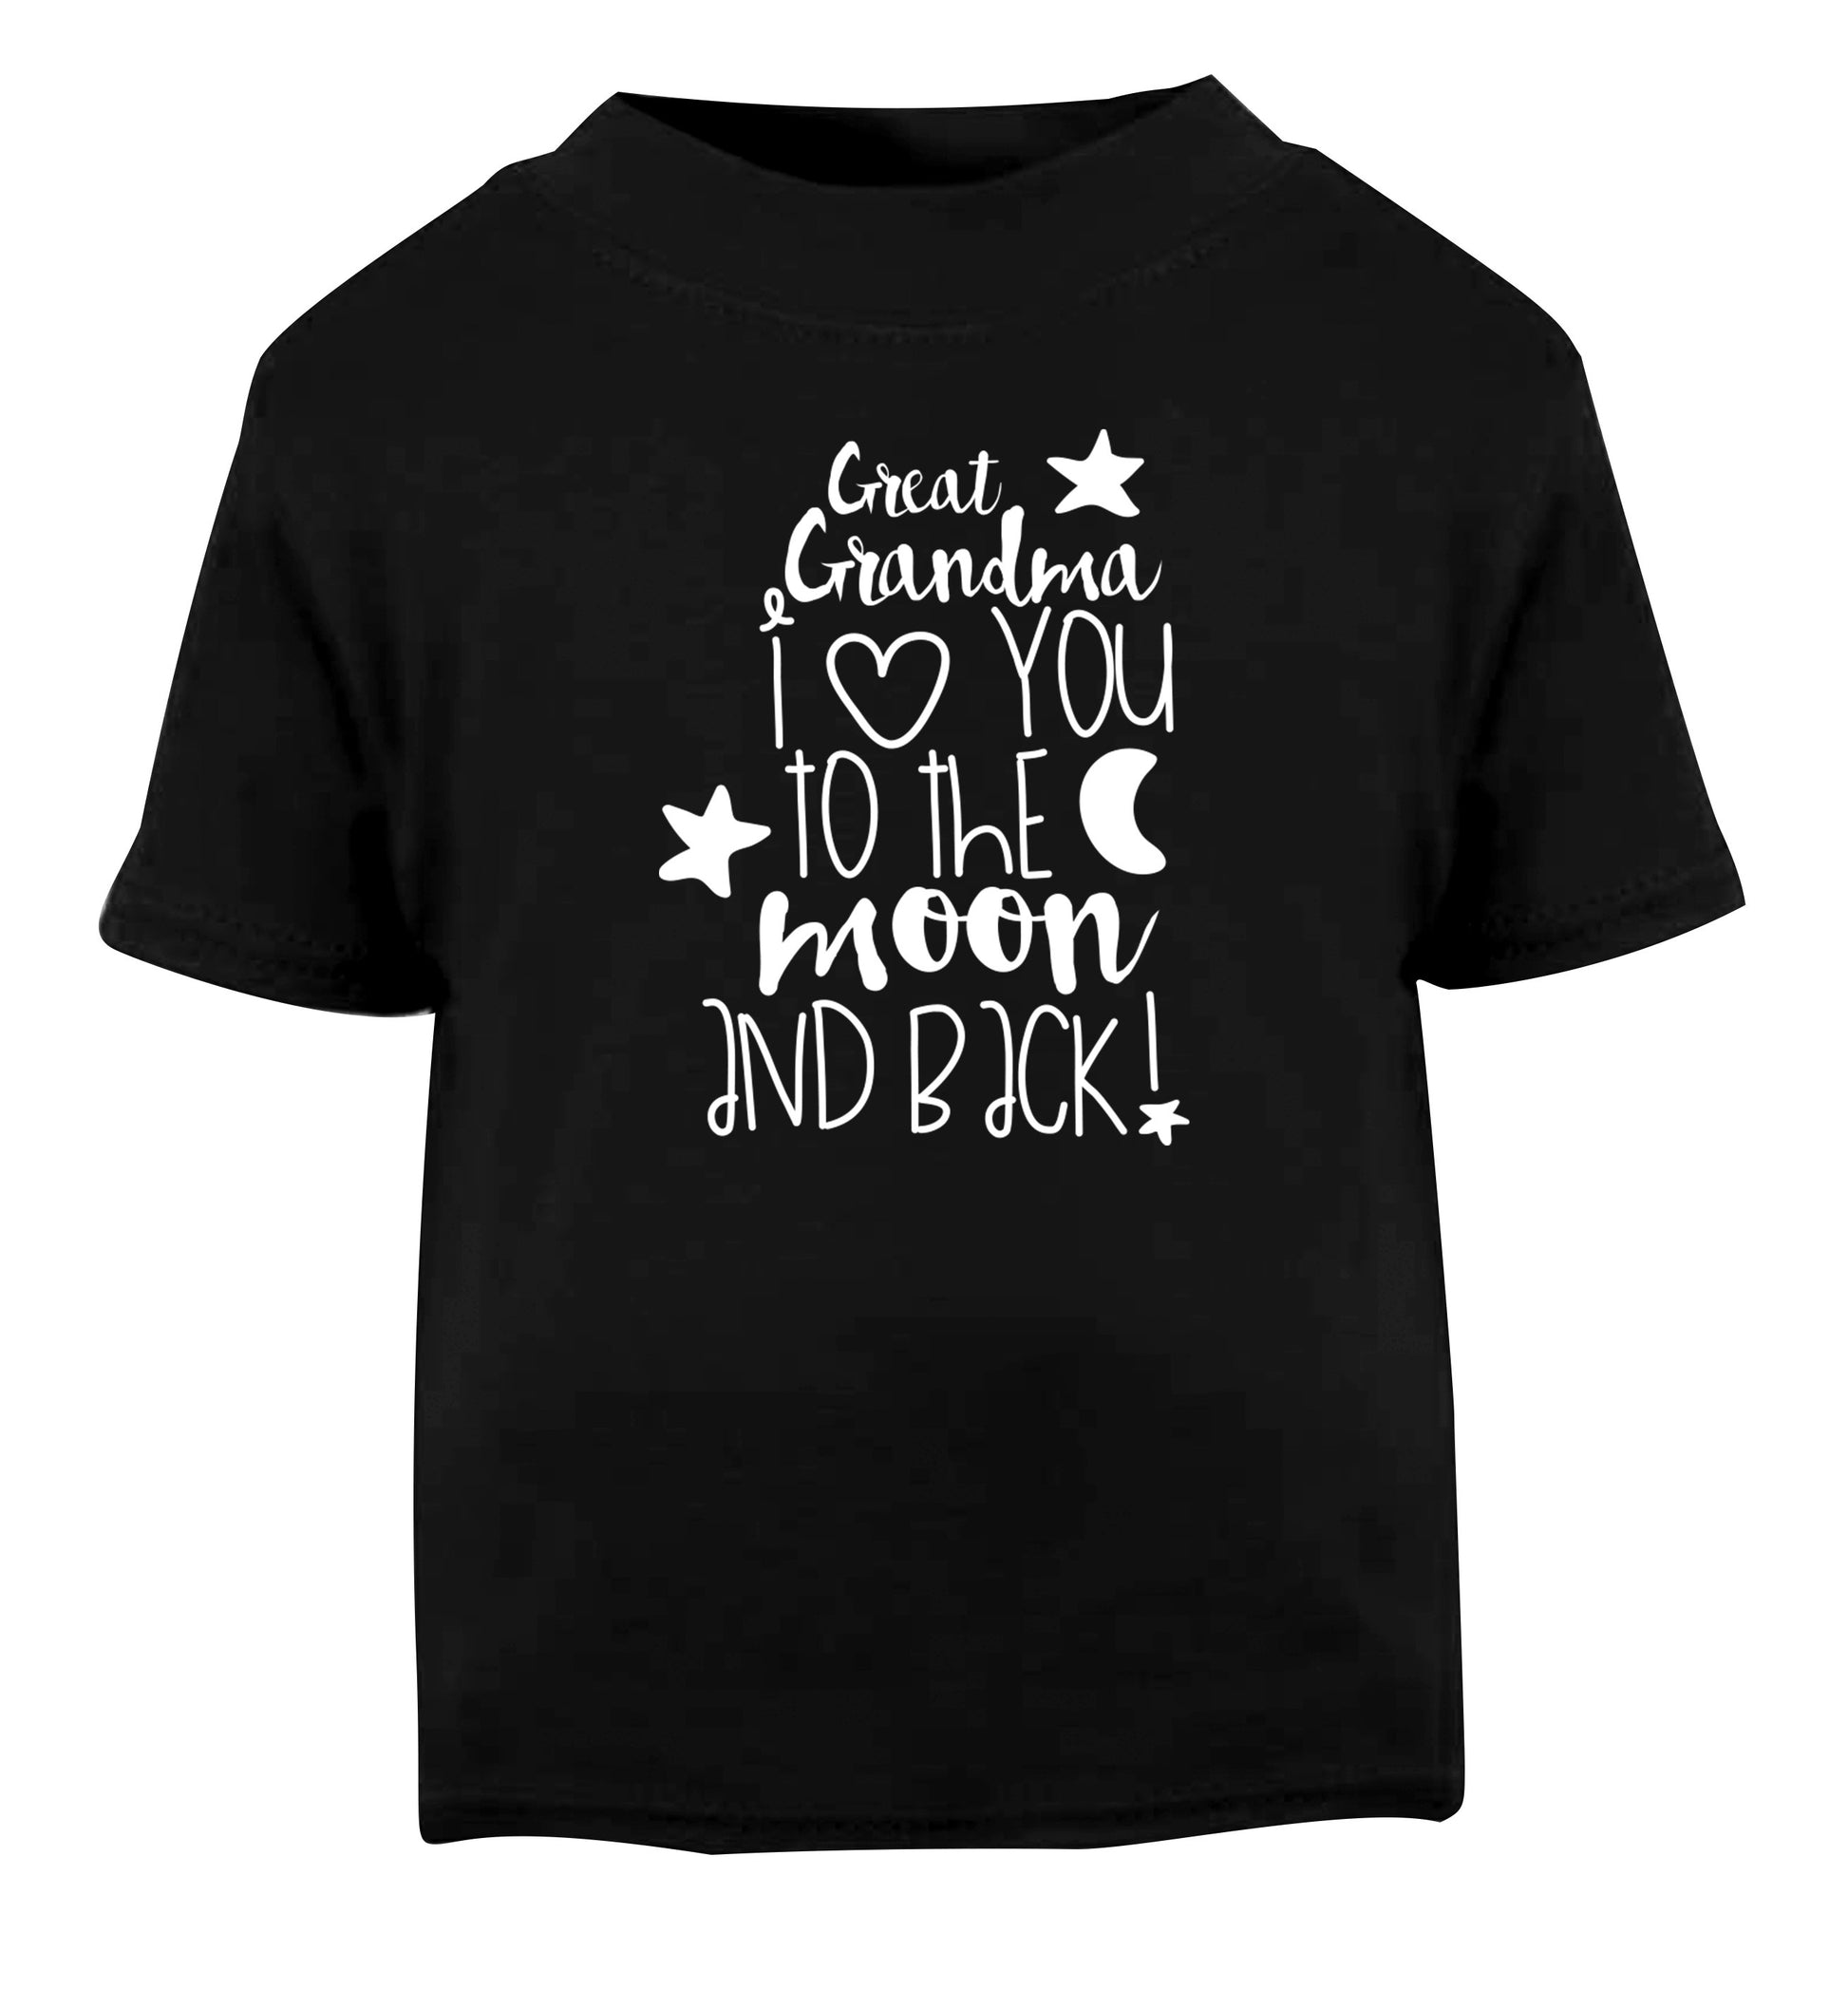 Great Grandma I love you to the moon and back Black Baby Toddler Tshirt 2 years